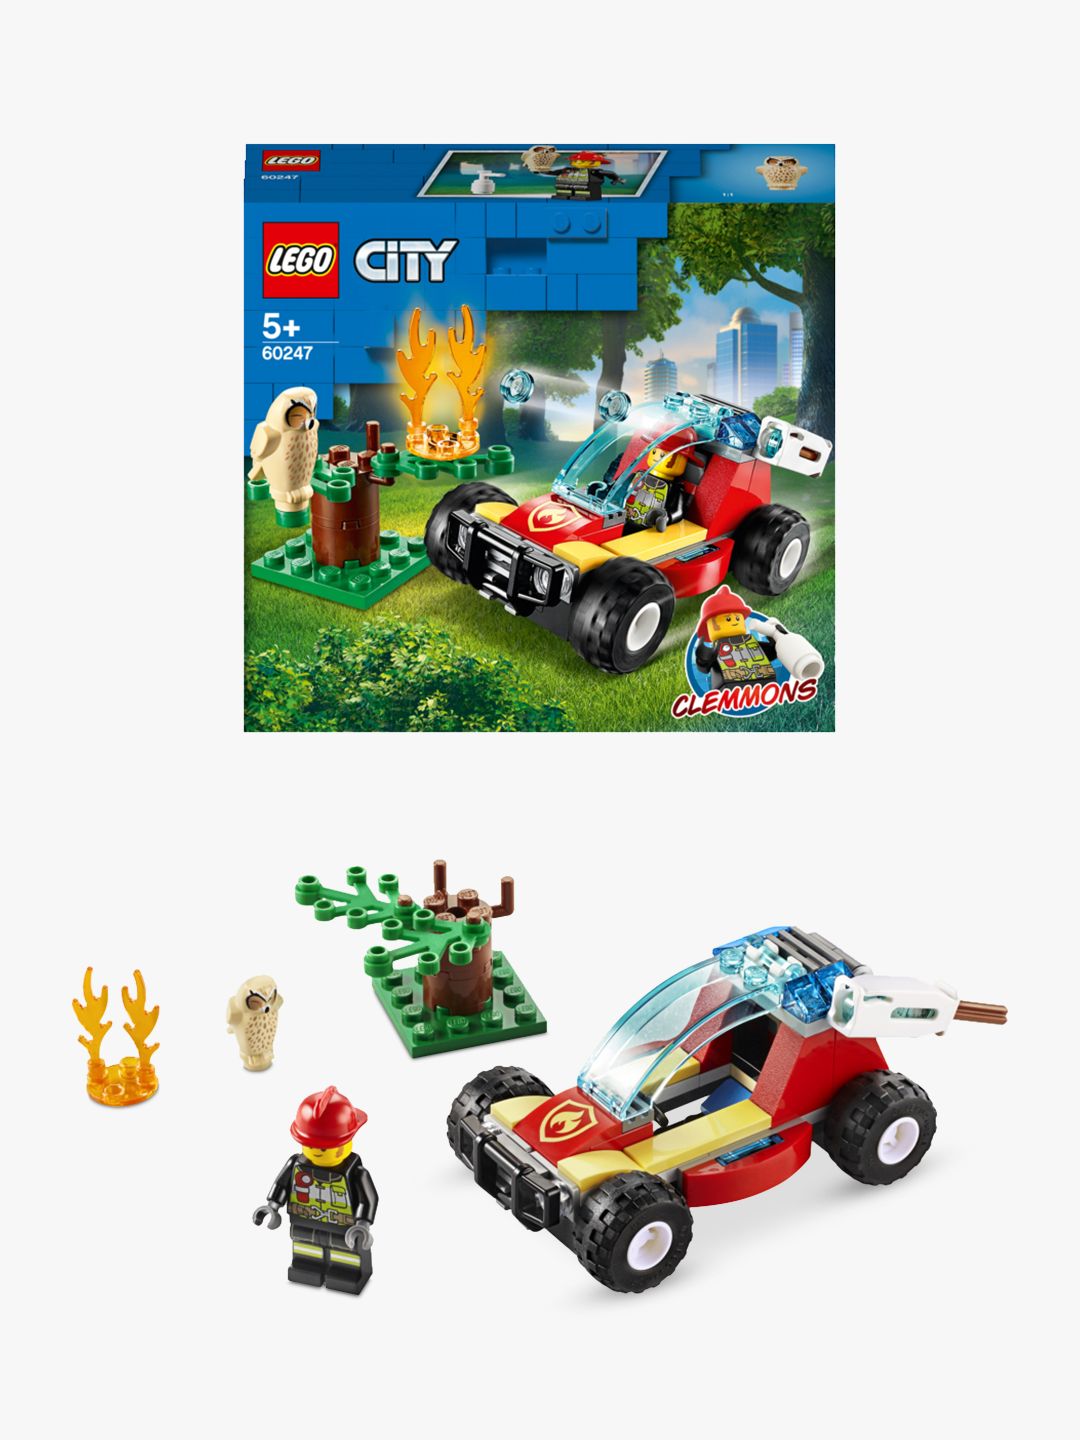 84 Pieces Cool Building Toy for Kids New 2020 LEGO City Forest Fire 60247 Firefighter Toy 